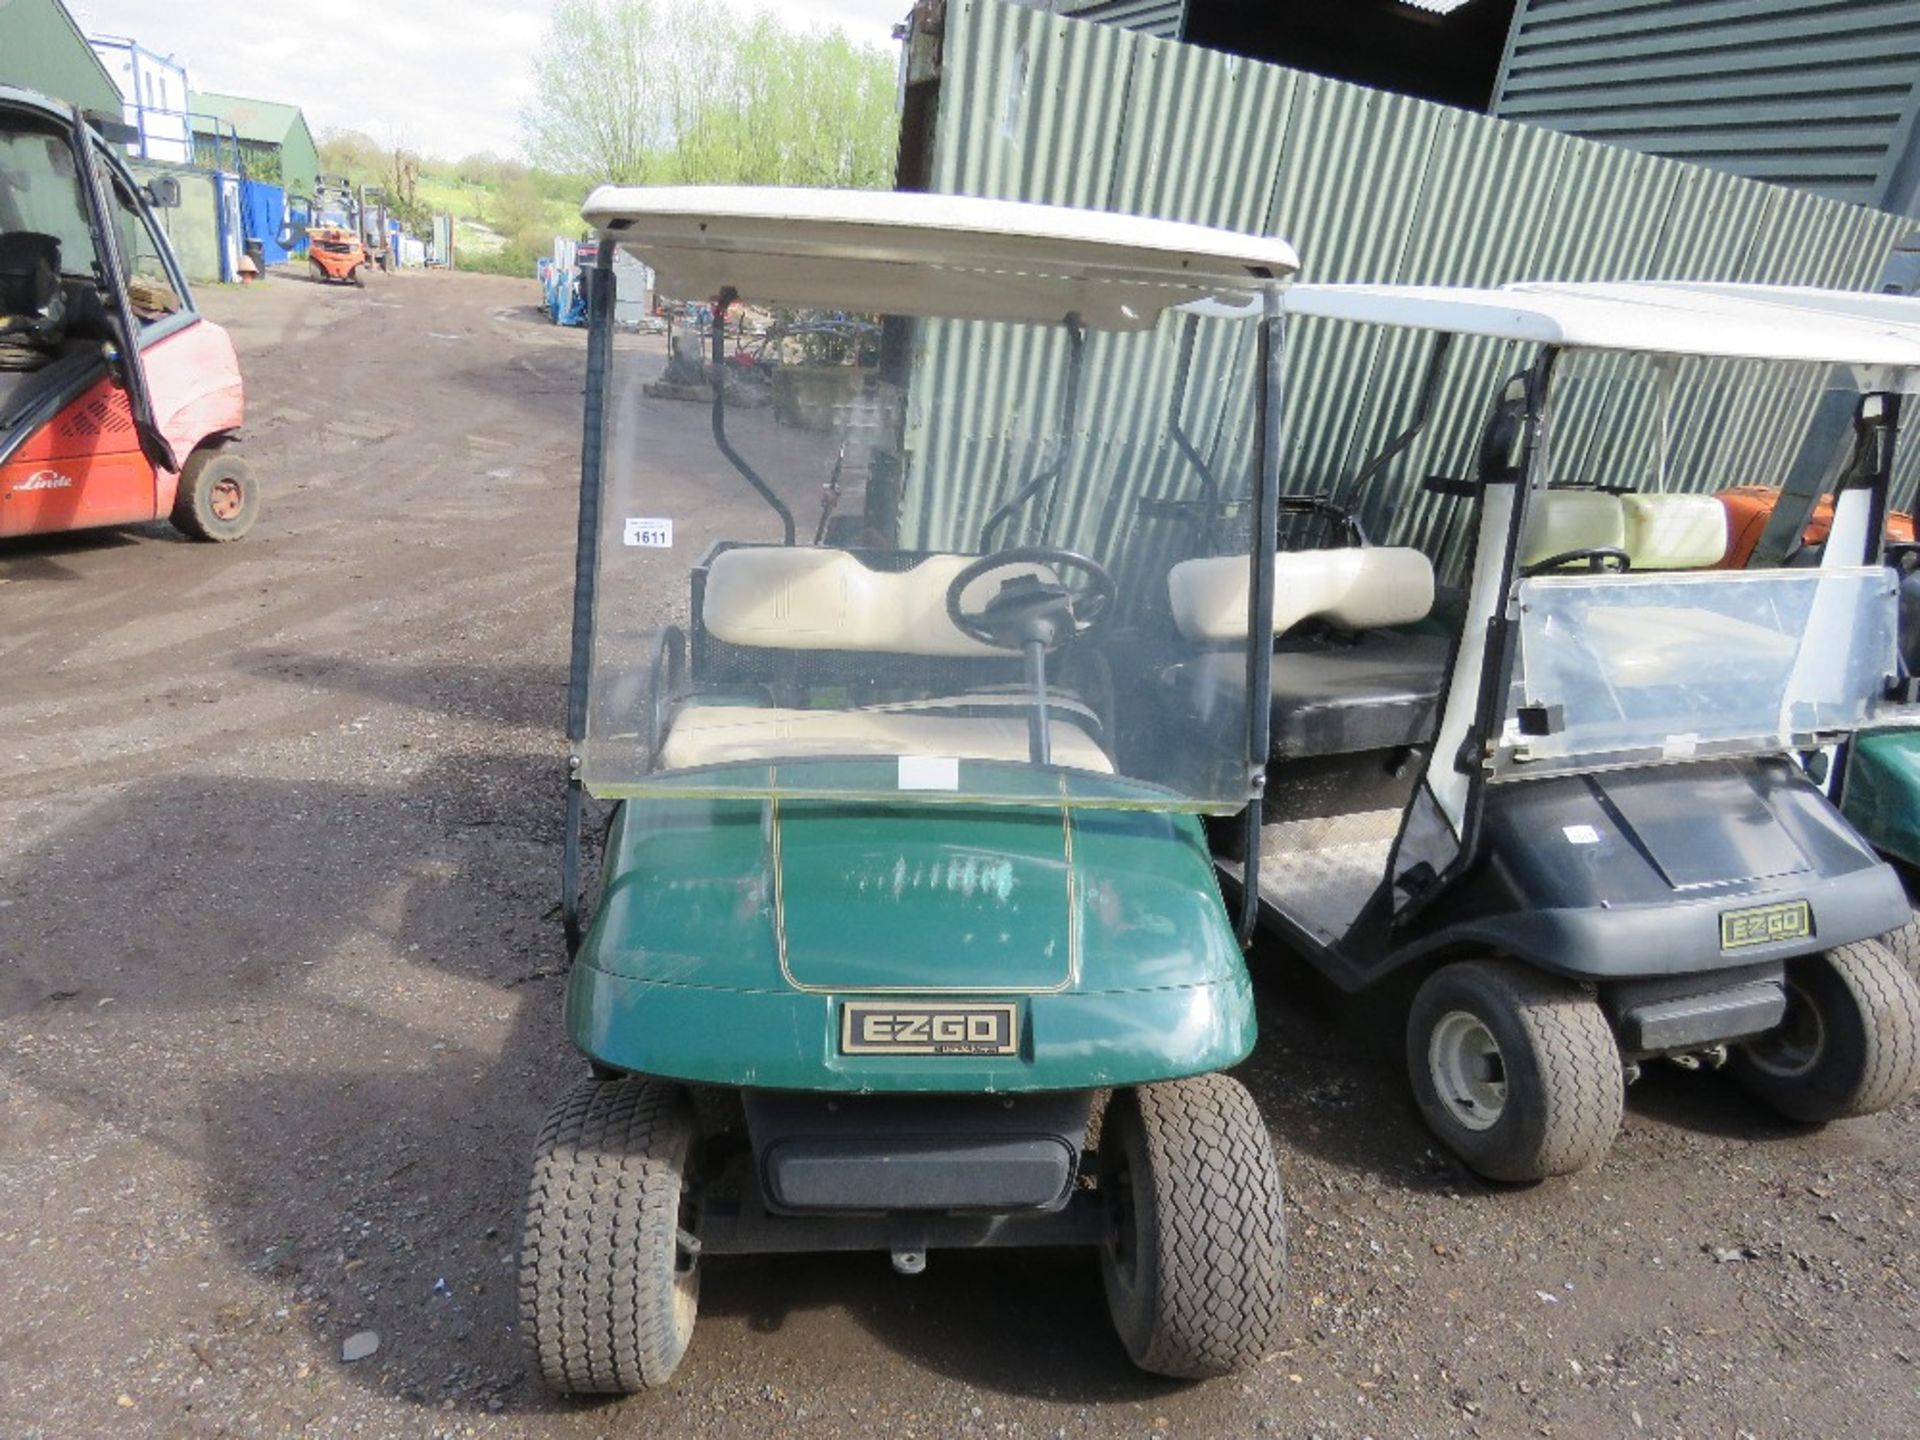 EZGO PETROL ENGINED GOLF BUGGY. GREEN COLOURED. WHEN TESTED WAS SEEN TO RUN, DRIVE, STEER AND BRAKE - Image 2 of 8